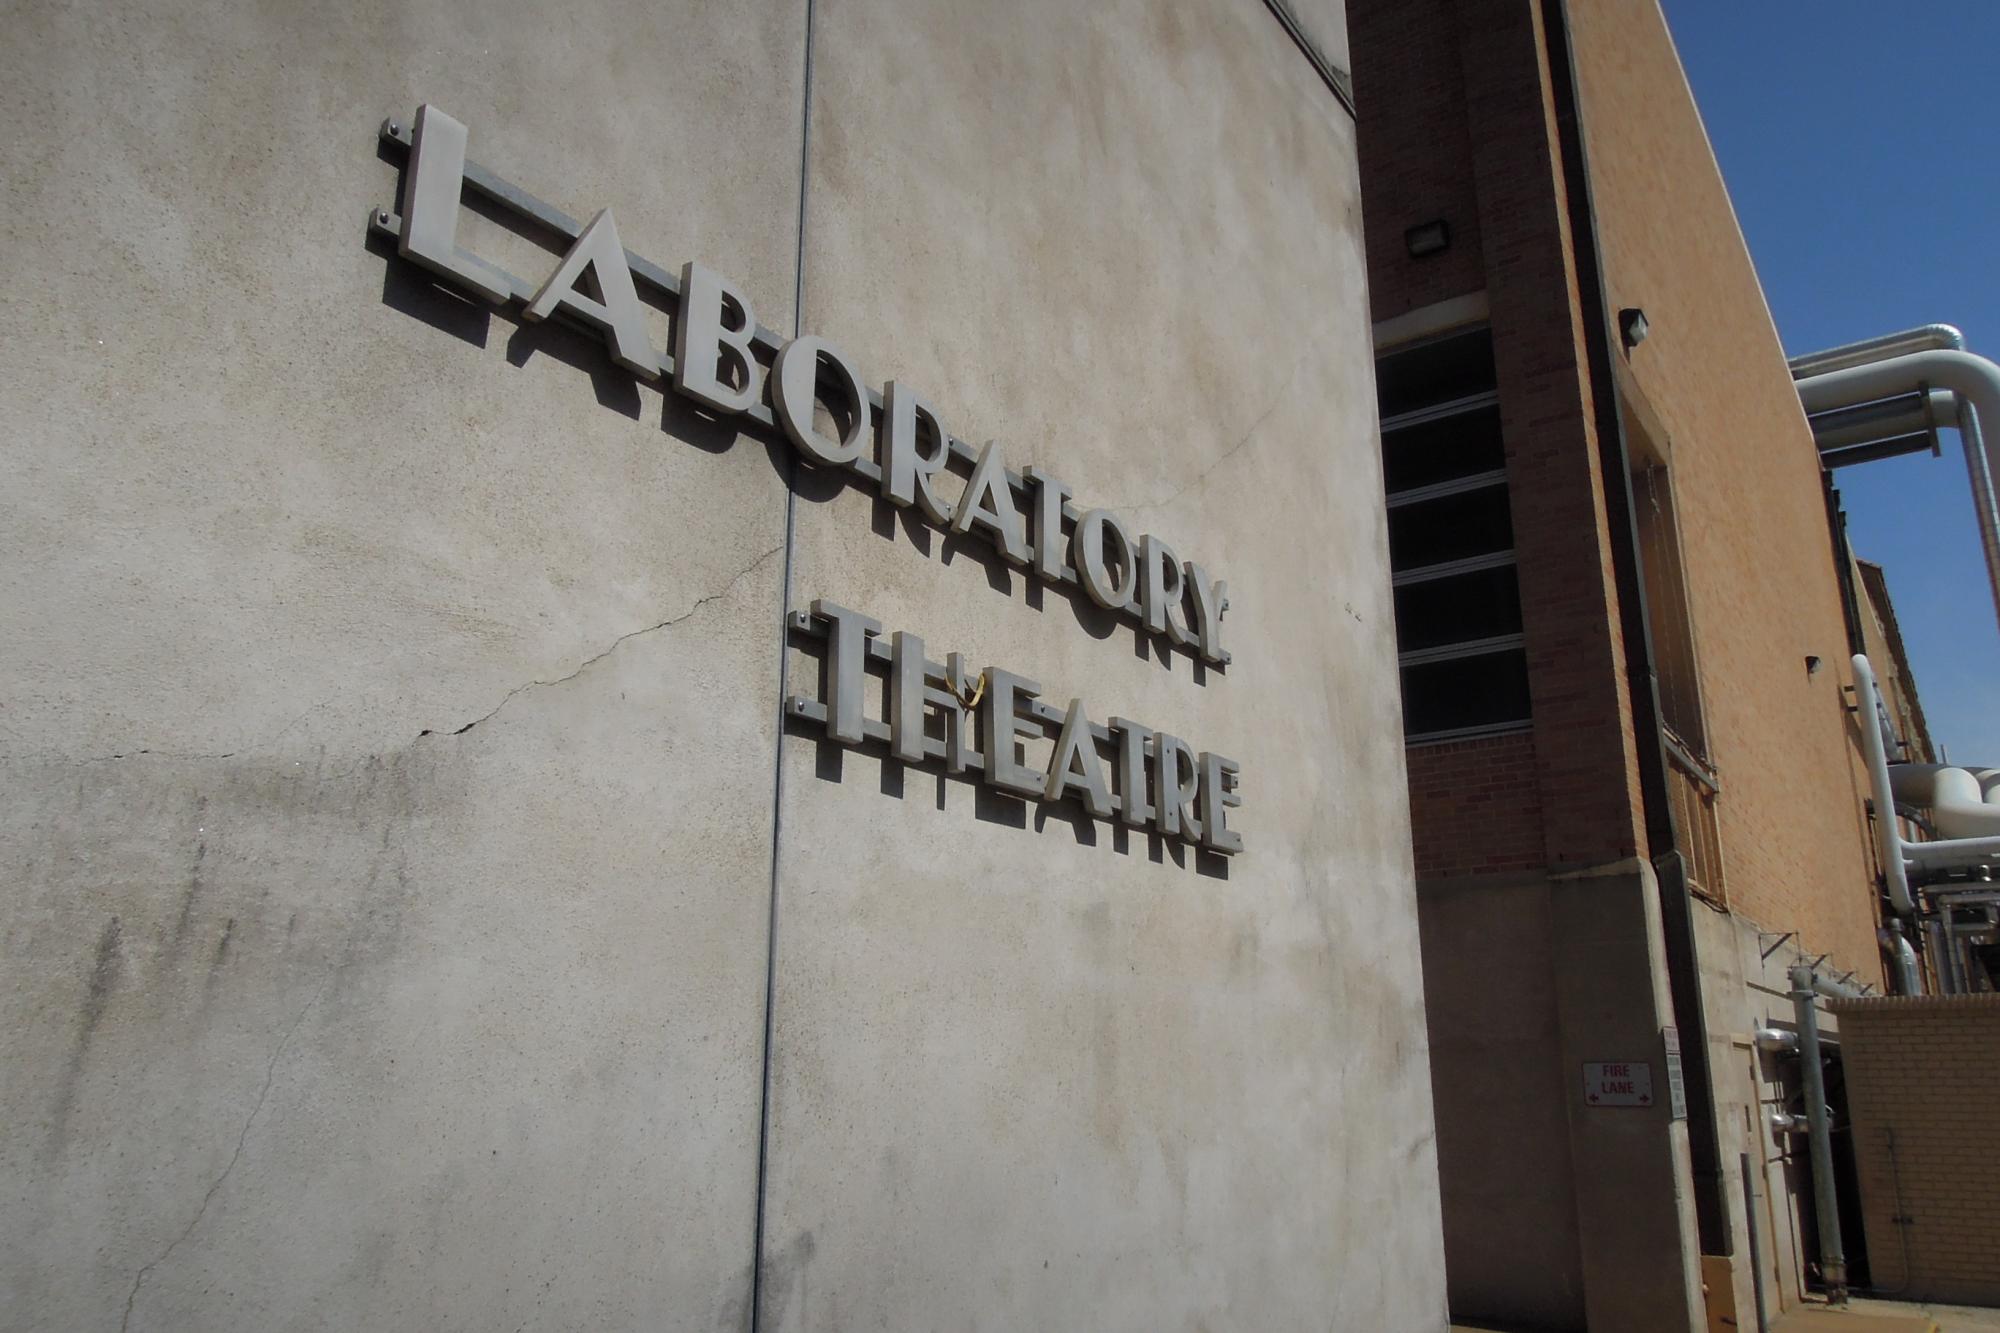 concrete wall with a metal sign spelling out "Laboratory Theatre"